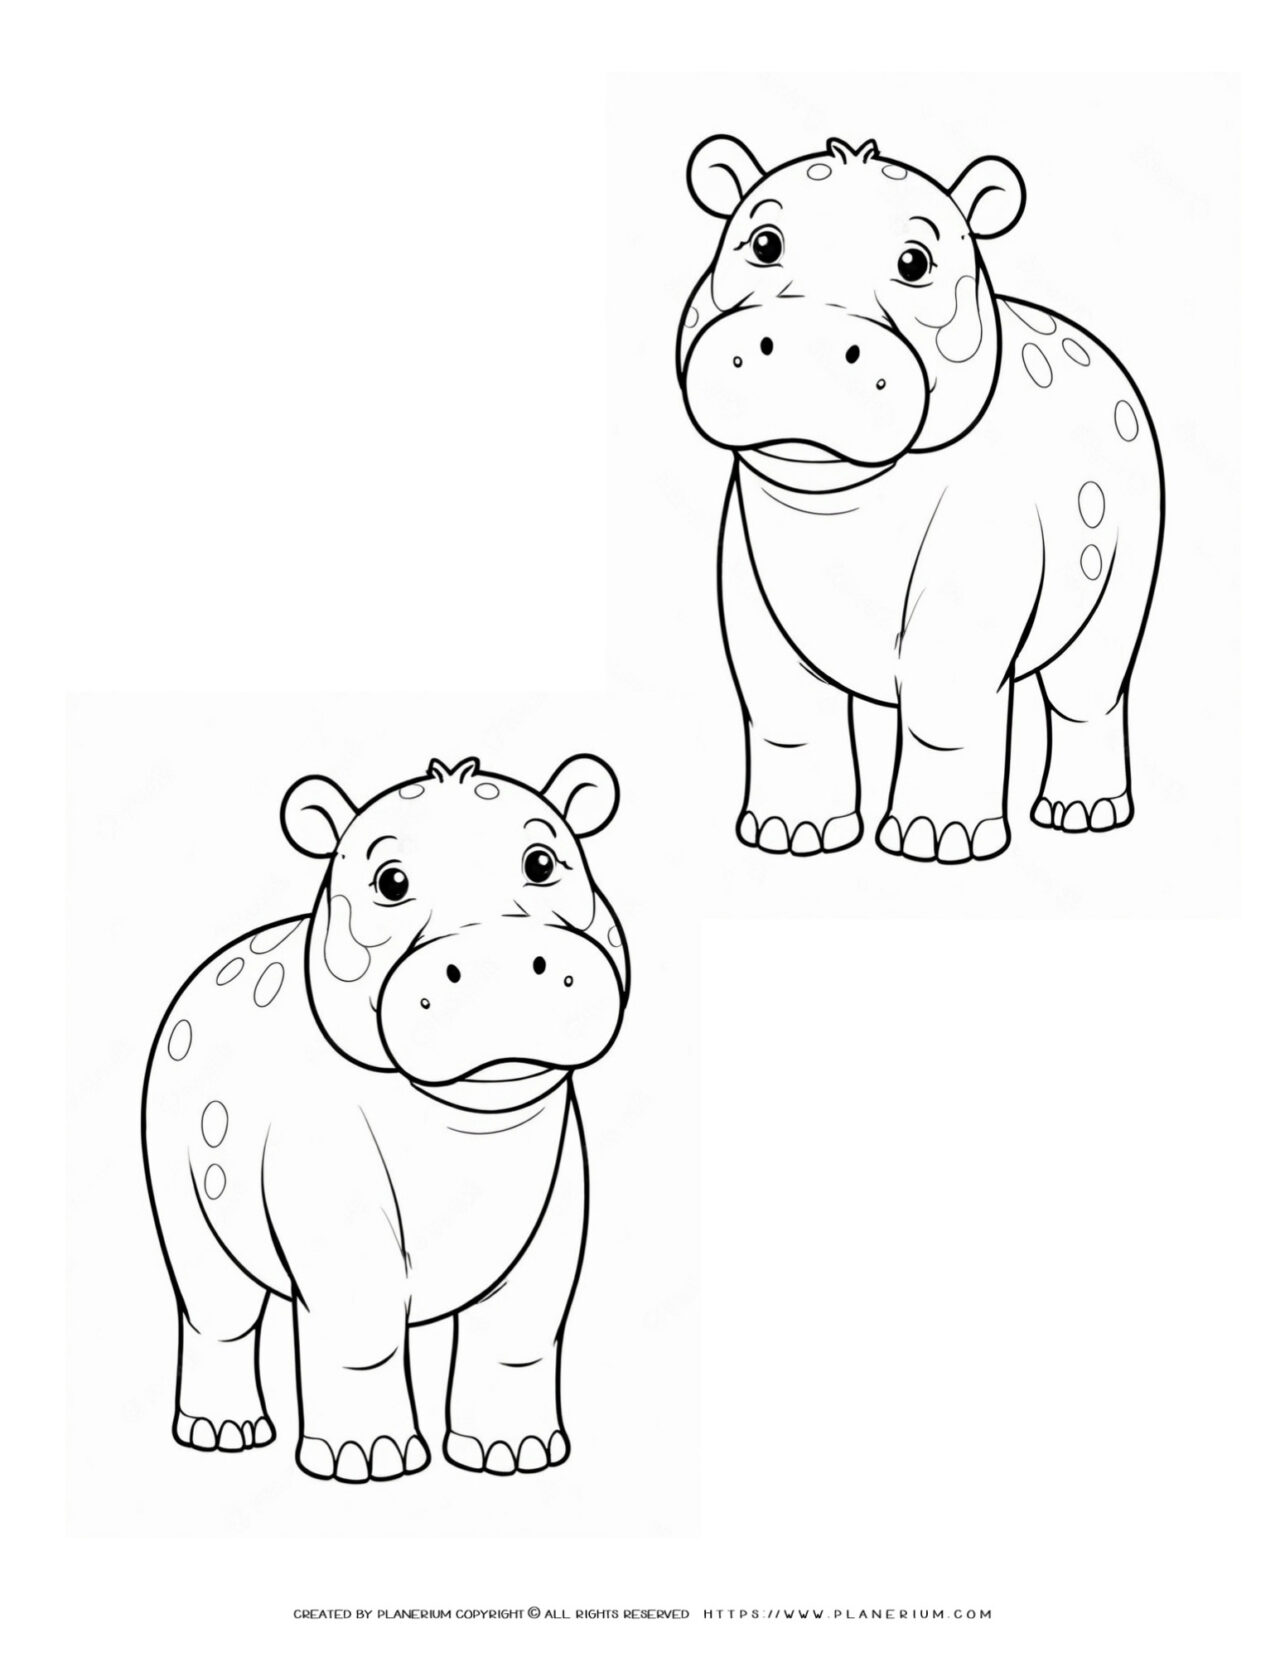 Two-Cute-Baby-Hippo-Outlines-Coloring-Page-for-Kids